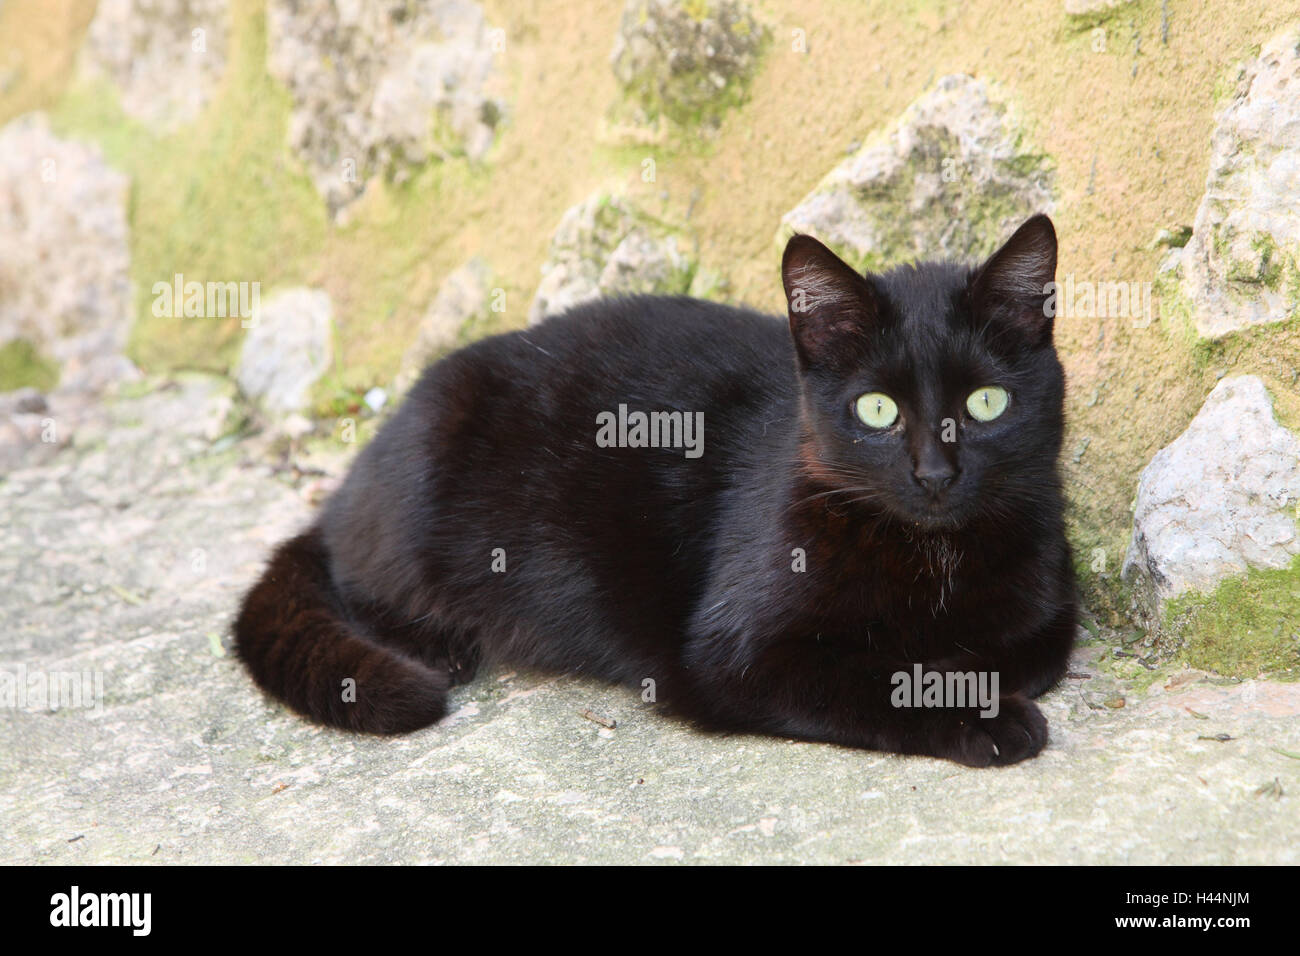 Cat, black, lie, animals, mammals, pets, small cats, Felidae, domesticates, house cat, without Lord, day release prisoners, stray, street cat, individually, only, outside, Spain, Stock Photo